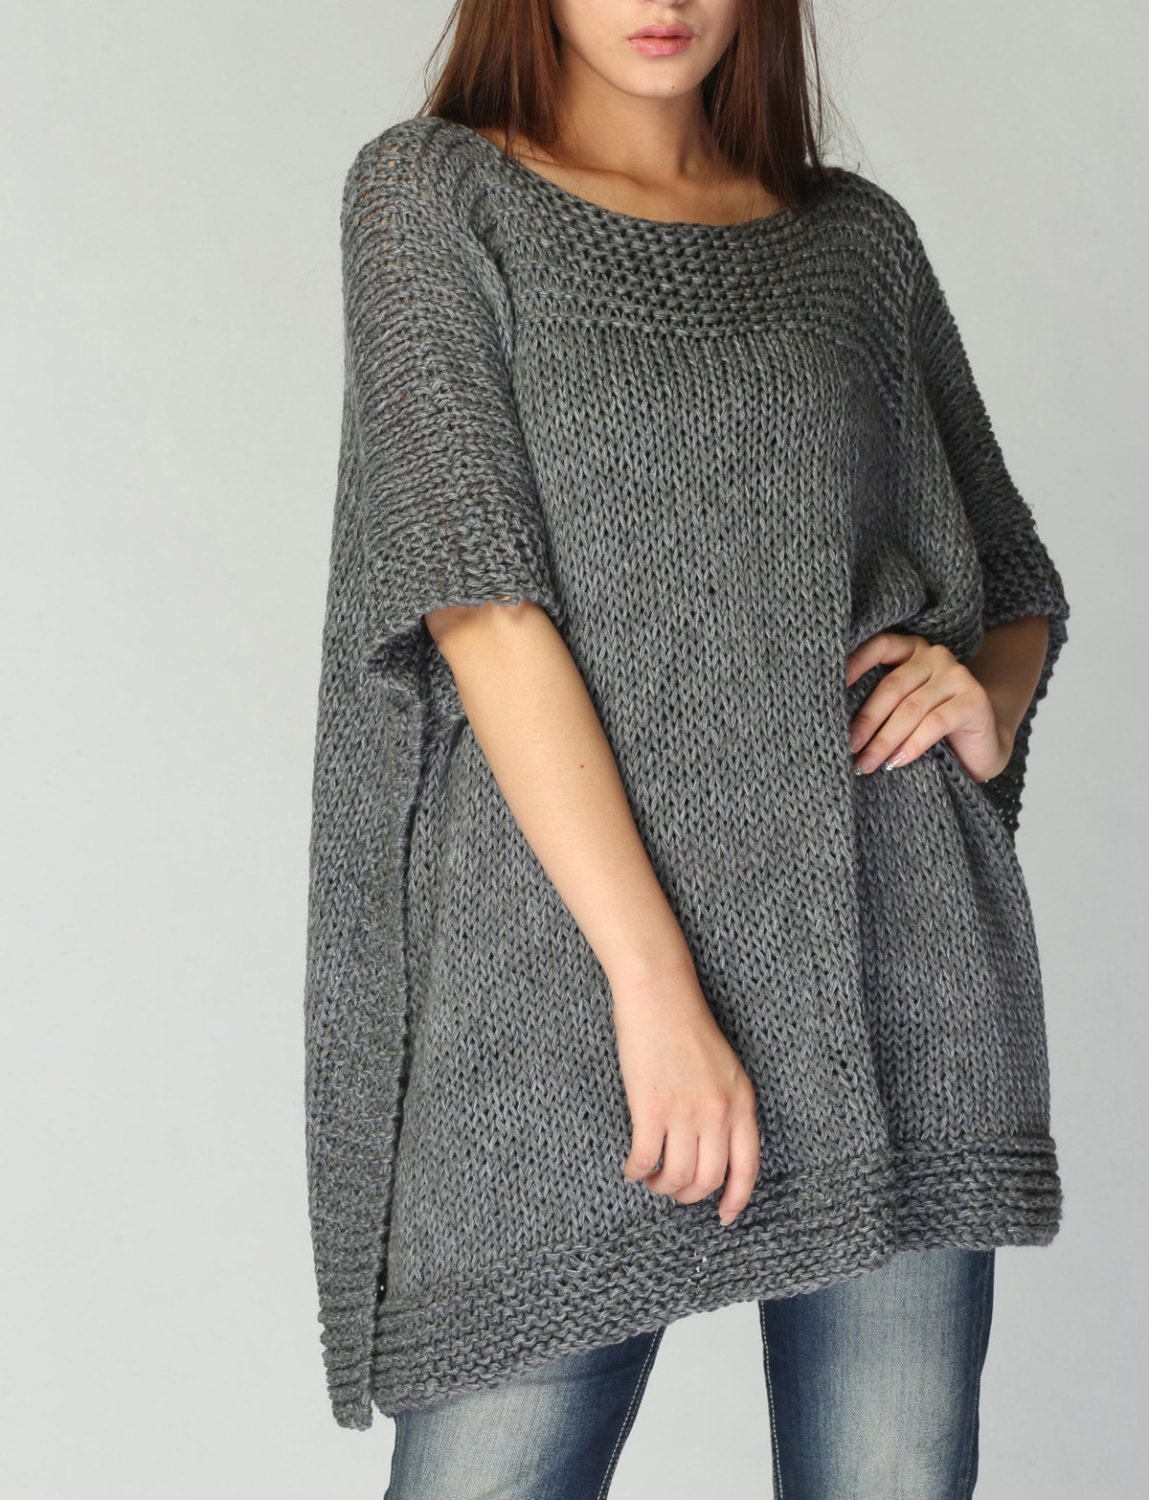 Hand knitted Poncho/ capelet in Charcoal eco cotton poncho